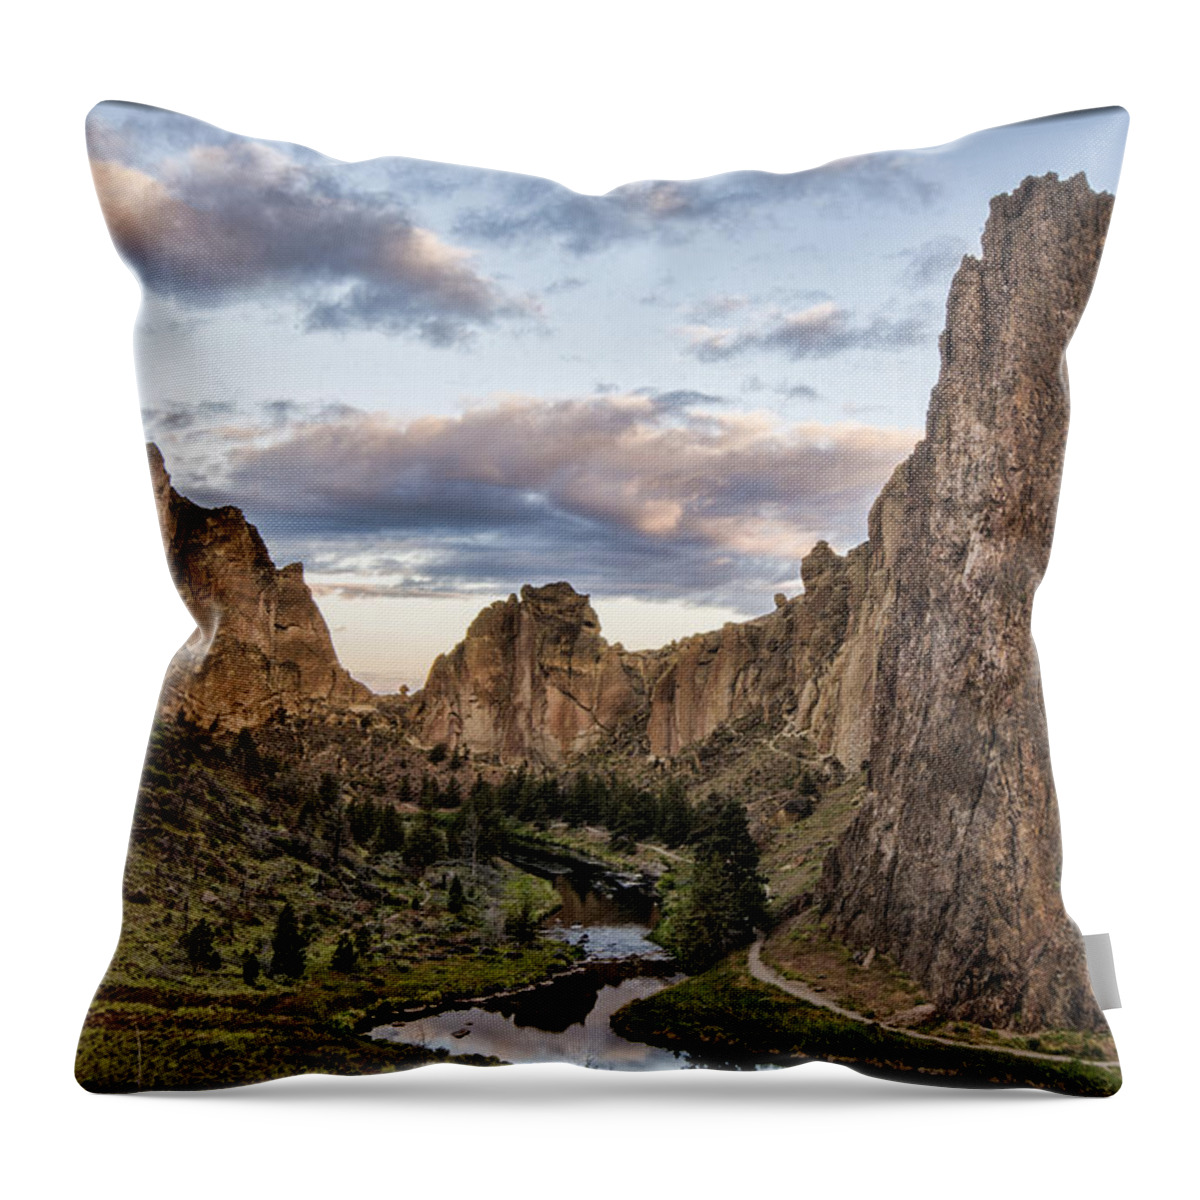 Clouds Throw Pillow featuring the photograph Smith Rock by Erika Fawcett